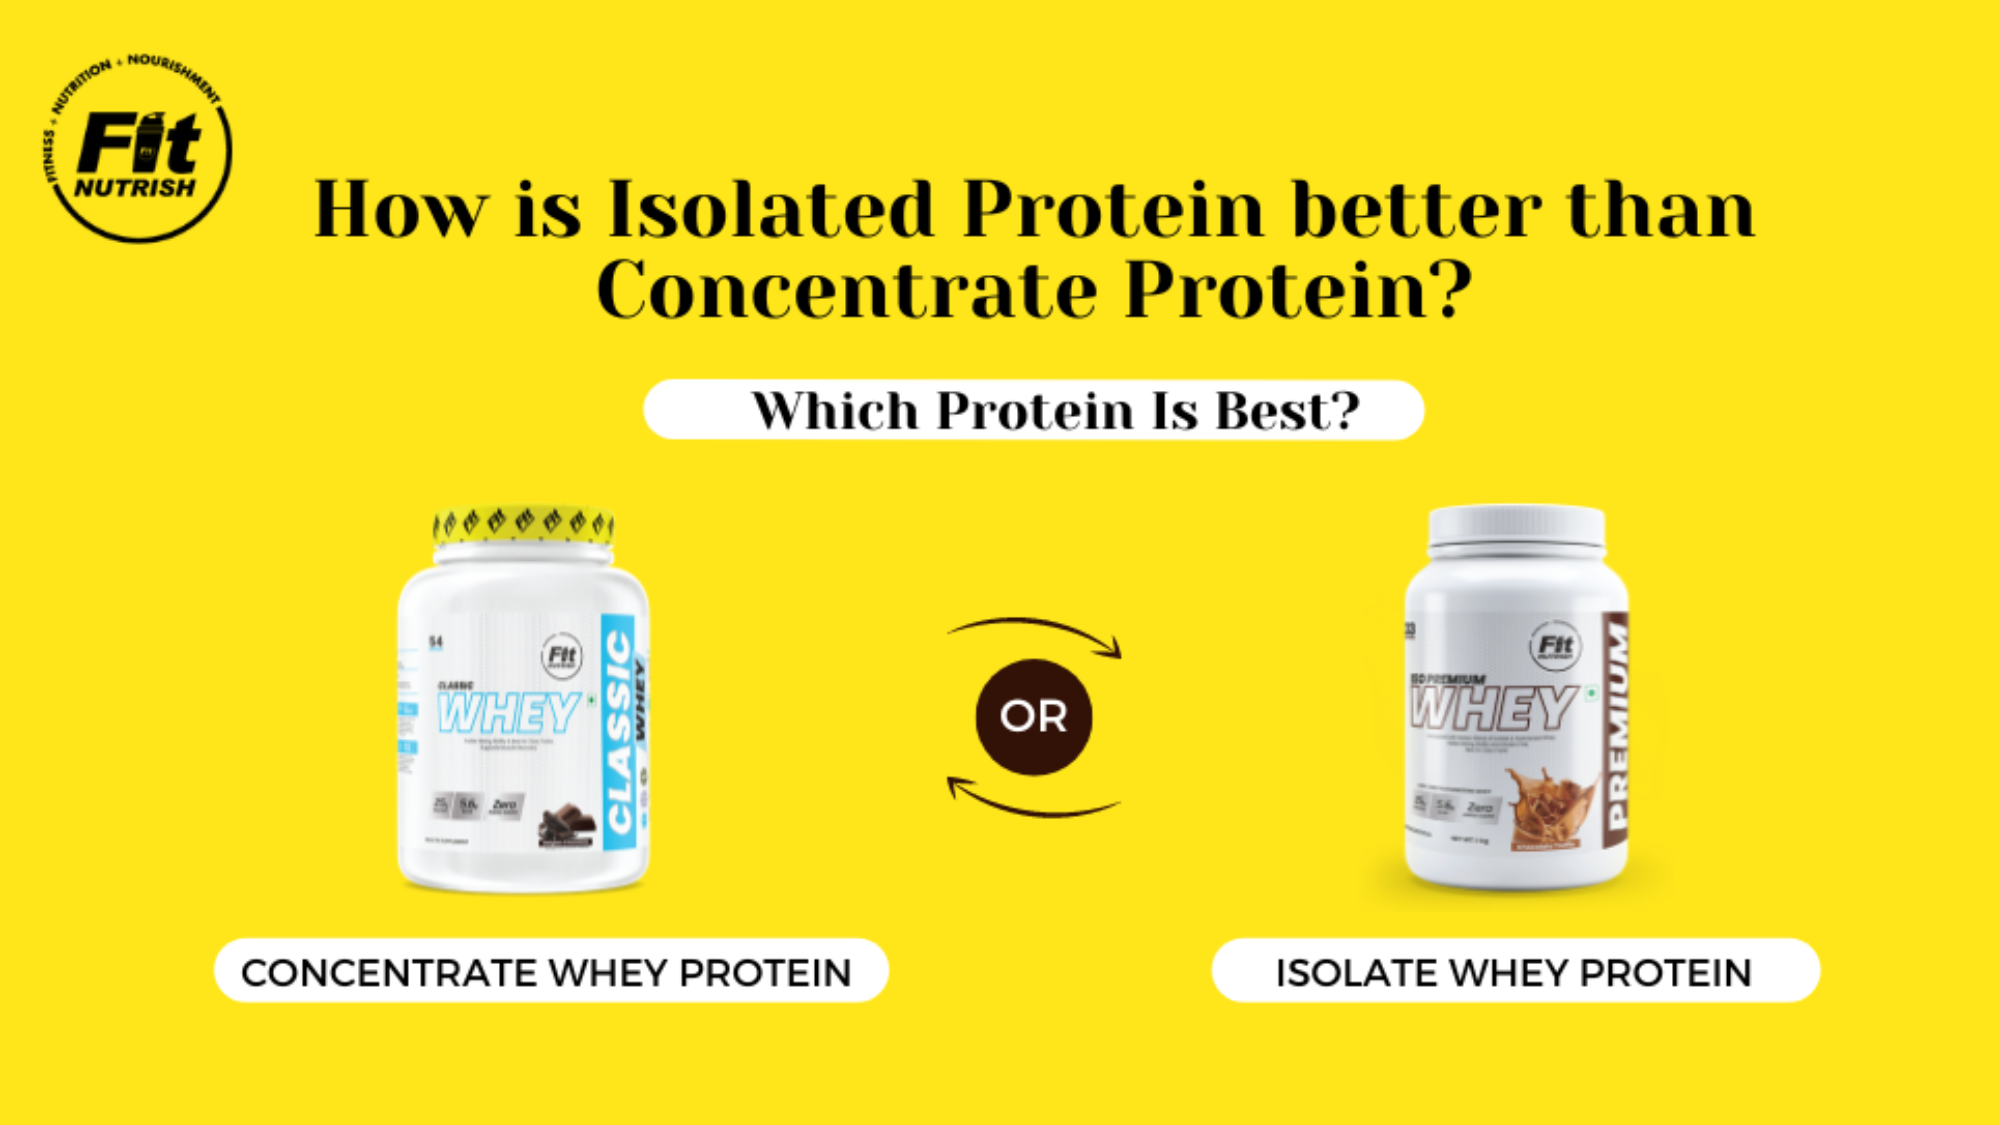 isolated protein better than concentrate protein